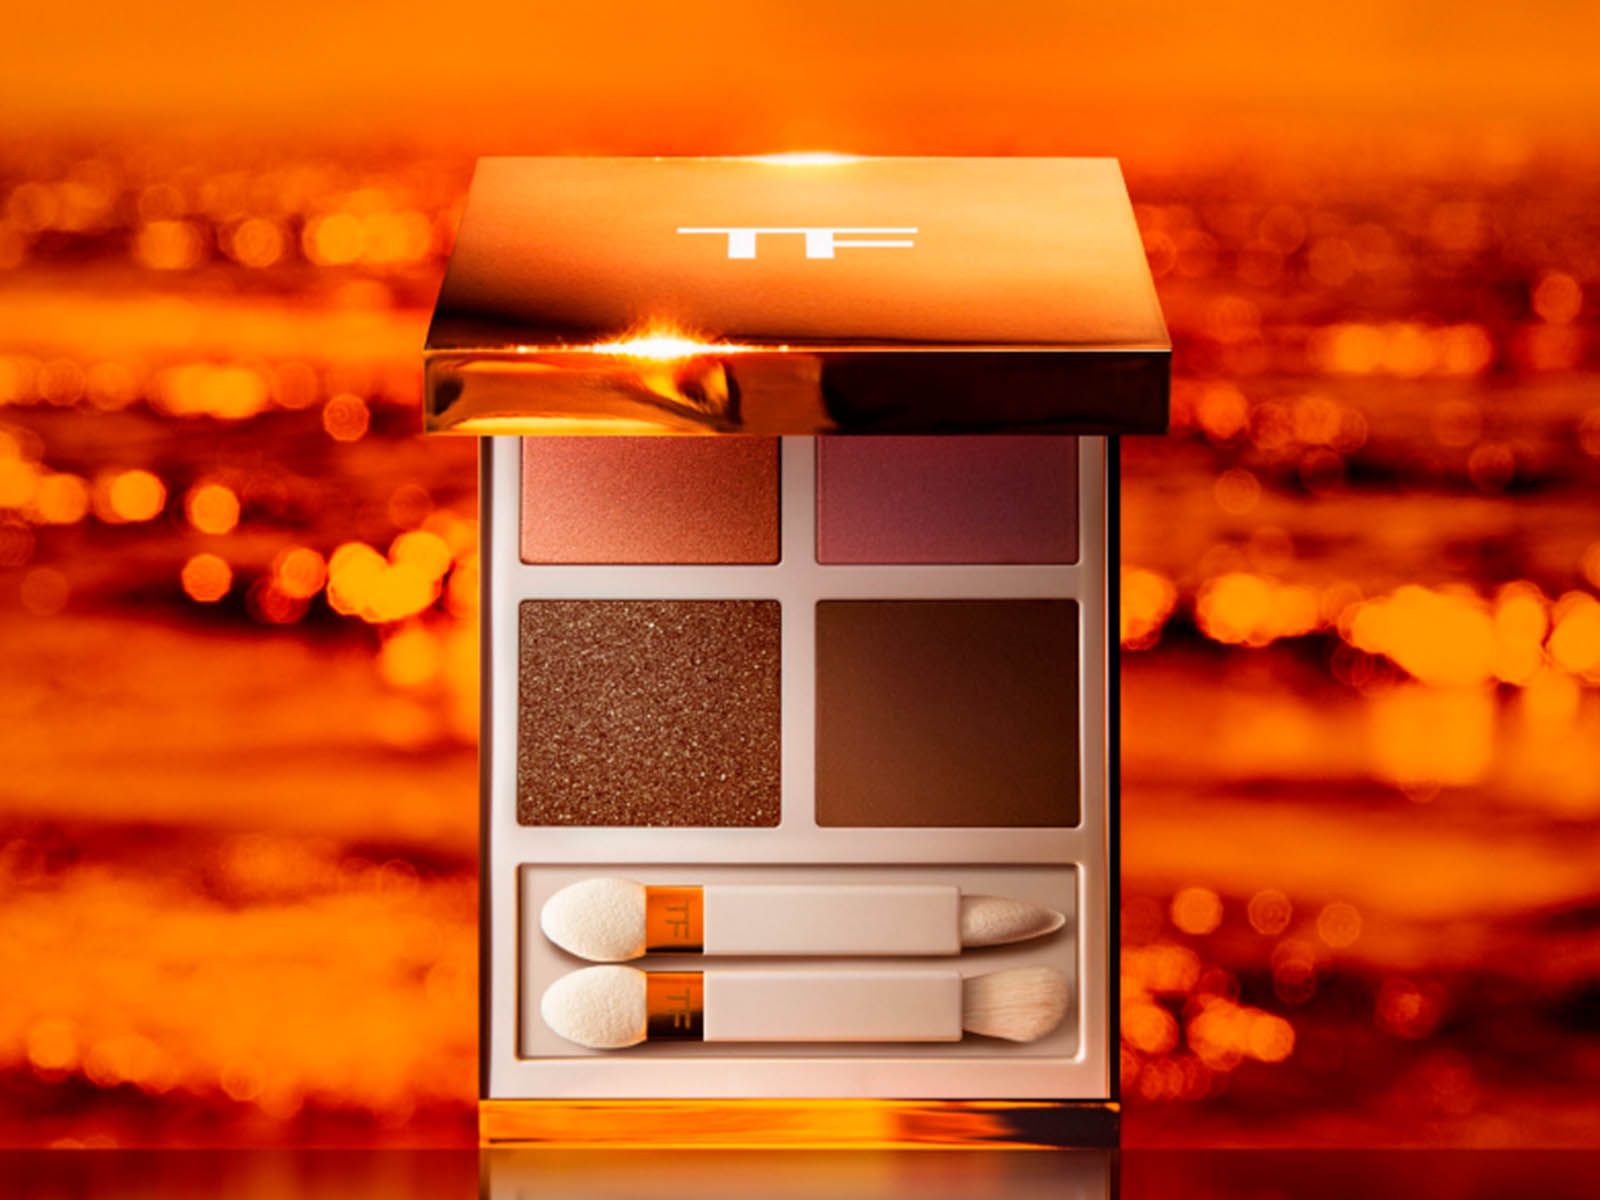 Tom Ford Beauty: Private Rose Garden collection arrives - HIGHXTAR.